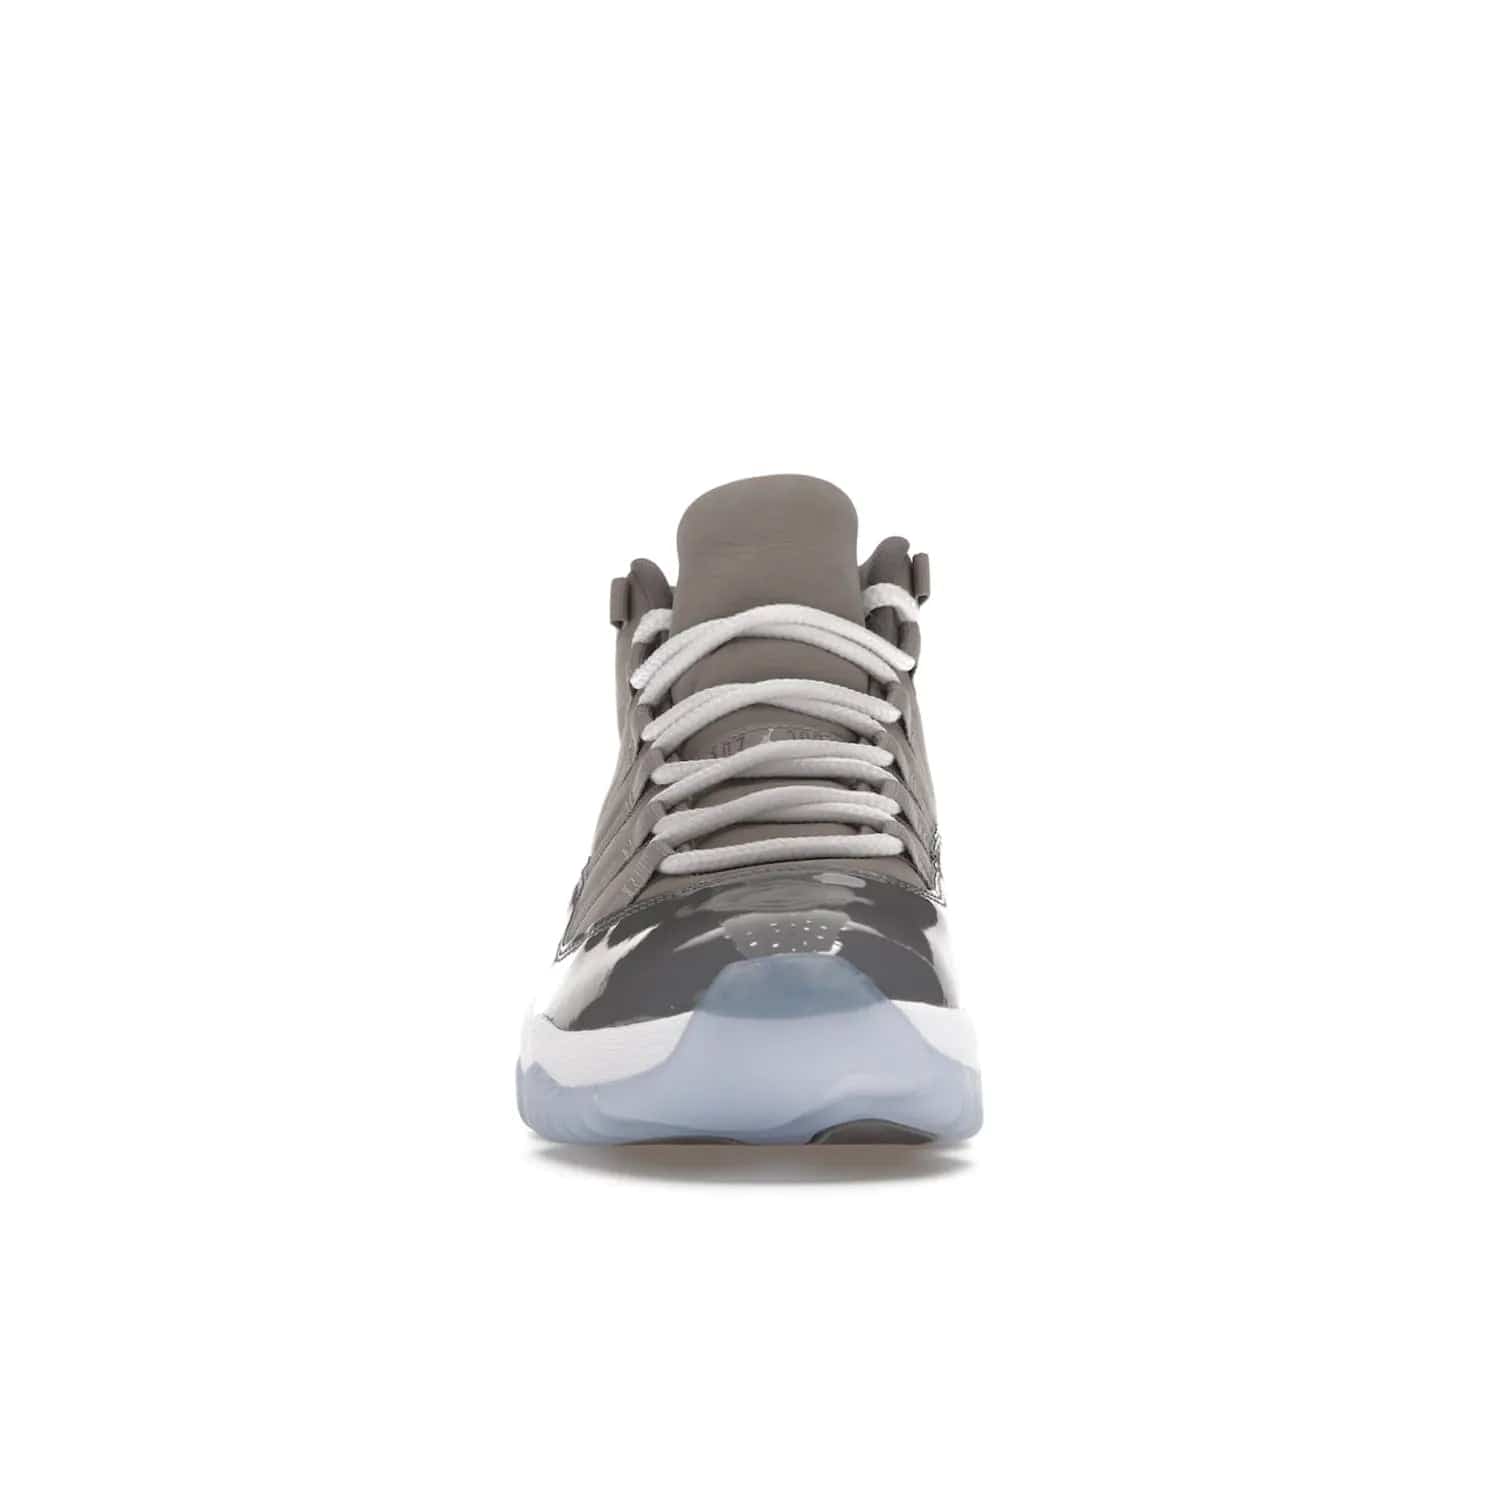 Jordan 11 Retro Cool Grey (2021) - Image 10 - Only at www.BallersClubKickz.com - Shop the Air Jordan 11 Retro Cool Grey (2021) for a must-have sneaker with a Cool Grey Durabuck upper, patent leather overlays, signature Jumpman embroidery, a white midsole, icy blue translucent outsole, and Multi-Color accents.  Released in December 2021 for $225.